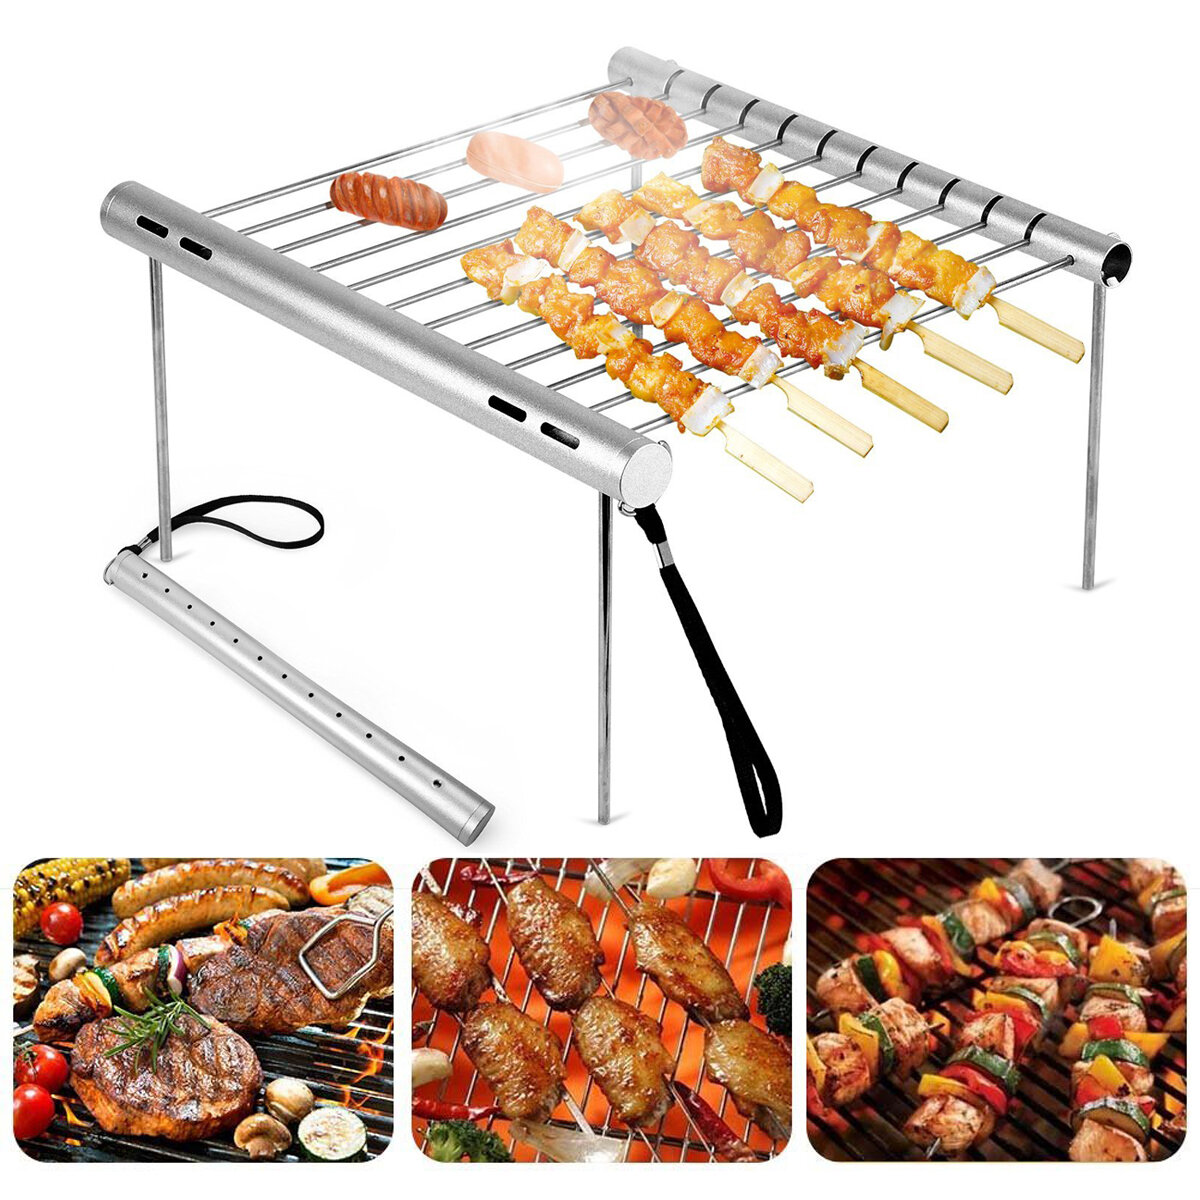 Outdoor Draagbare Vouwen Rvs Barbecue Grill Camping Picknick BBQ Rack